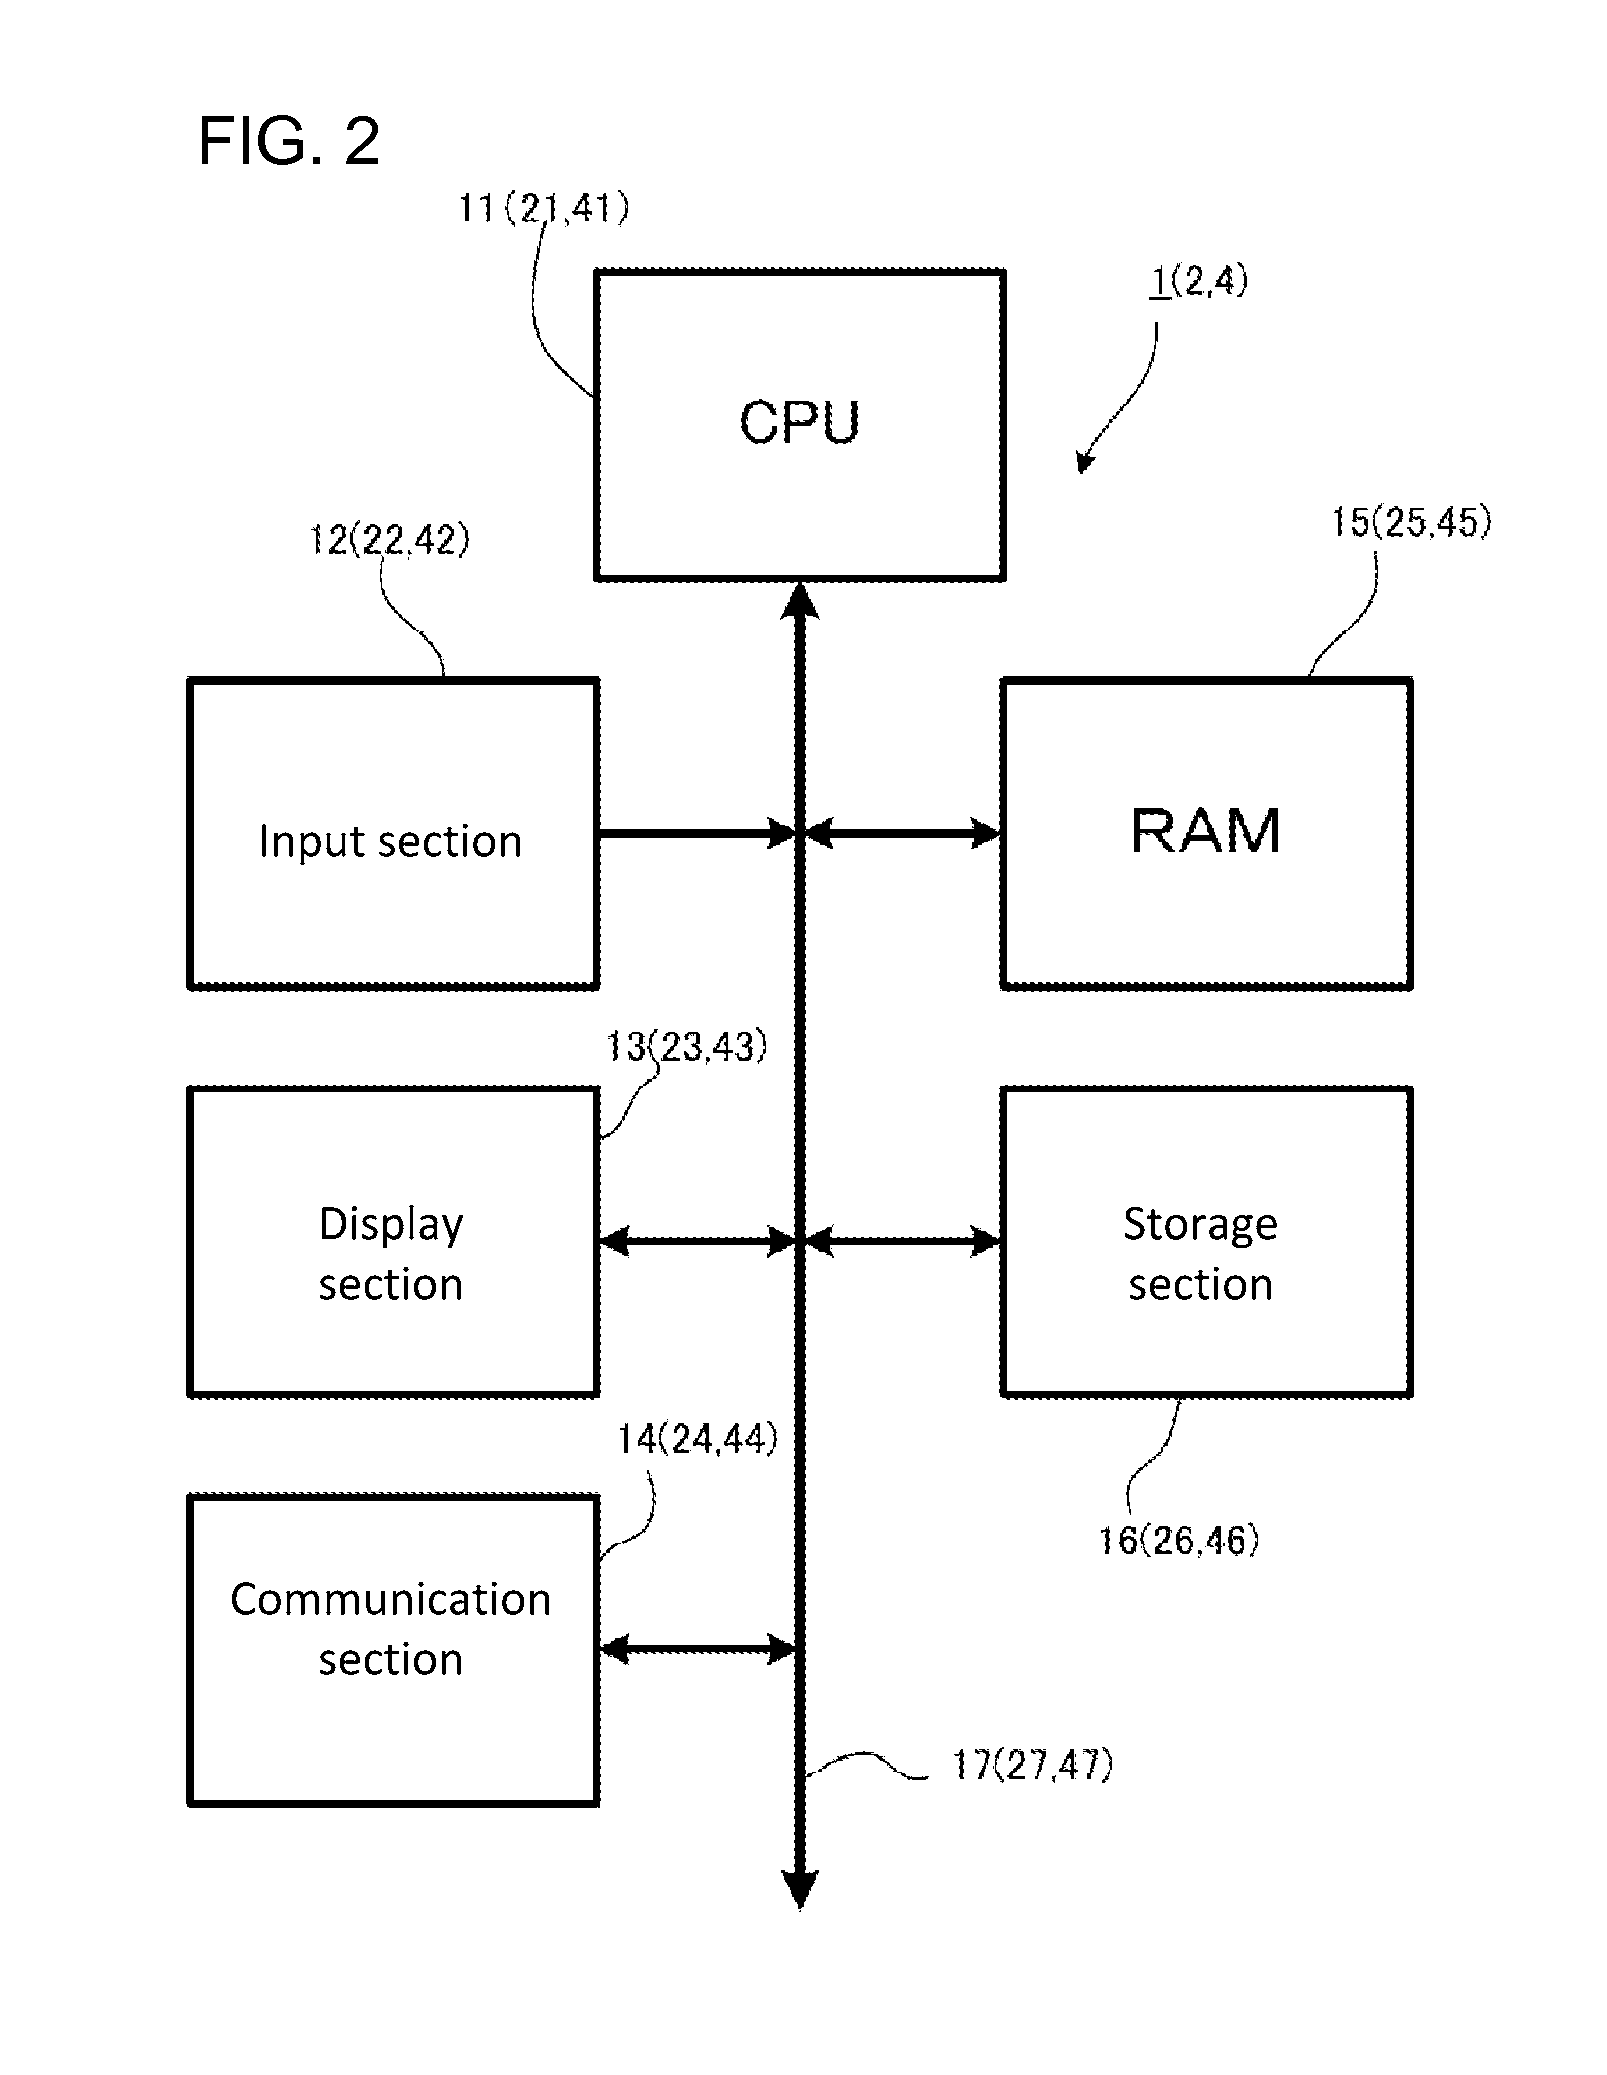 Client system and server